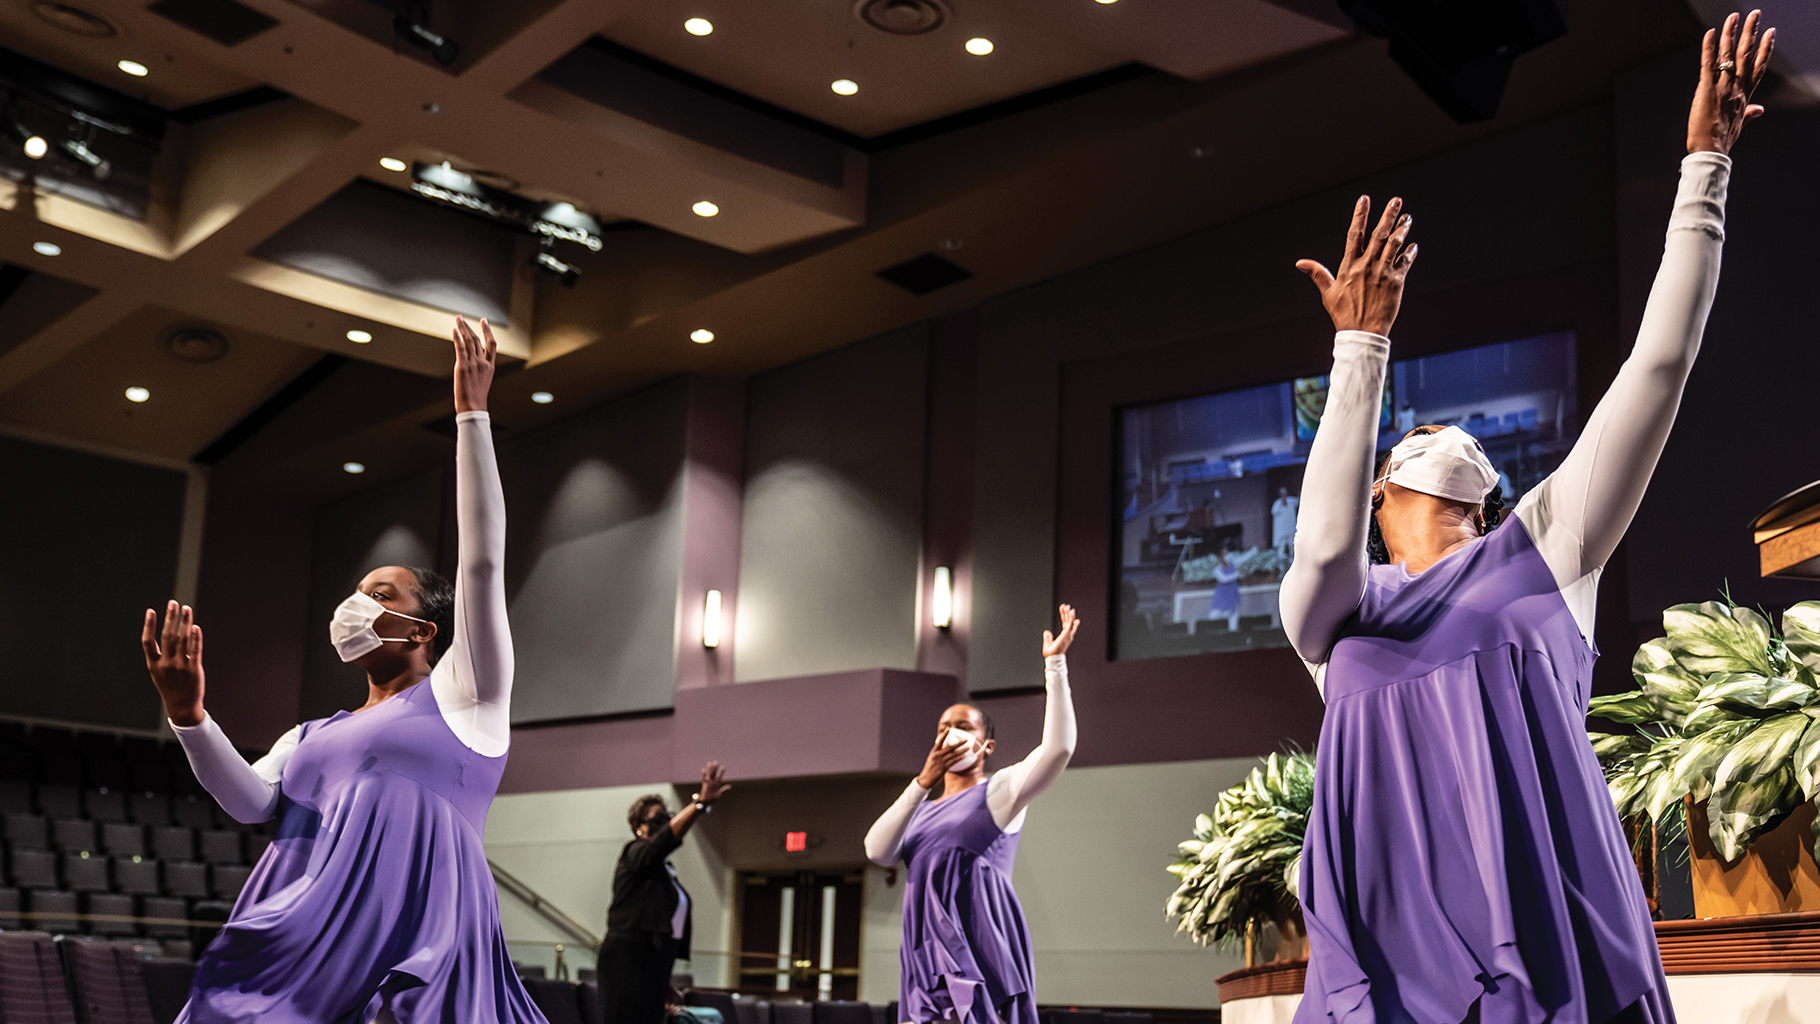 Praise dancers express spiritual joy during the services at First Baptist Church of Highland Park, which also feature gospel singers.